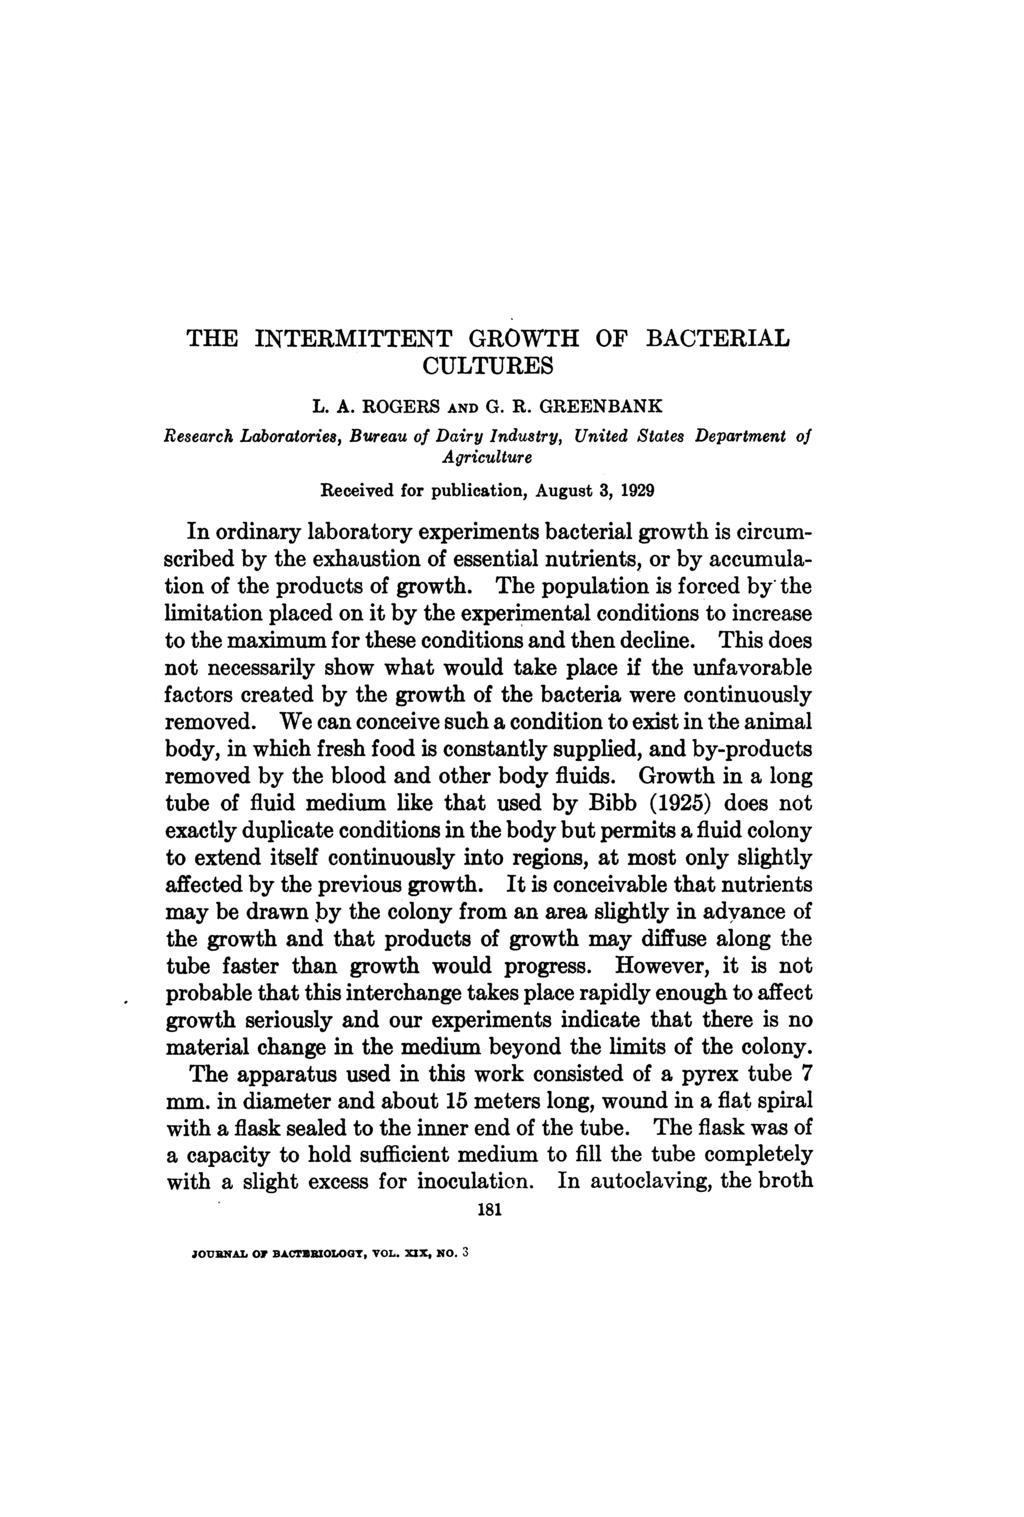 THE INTERMITTENT GROWTH OF BACTERIAL CULTURES Re-search Laboratories, Bureau of Dairy Industry, United States Department of Agriculture Received for publication, August 3, 1929 In ordinary laboratory